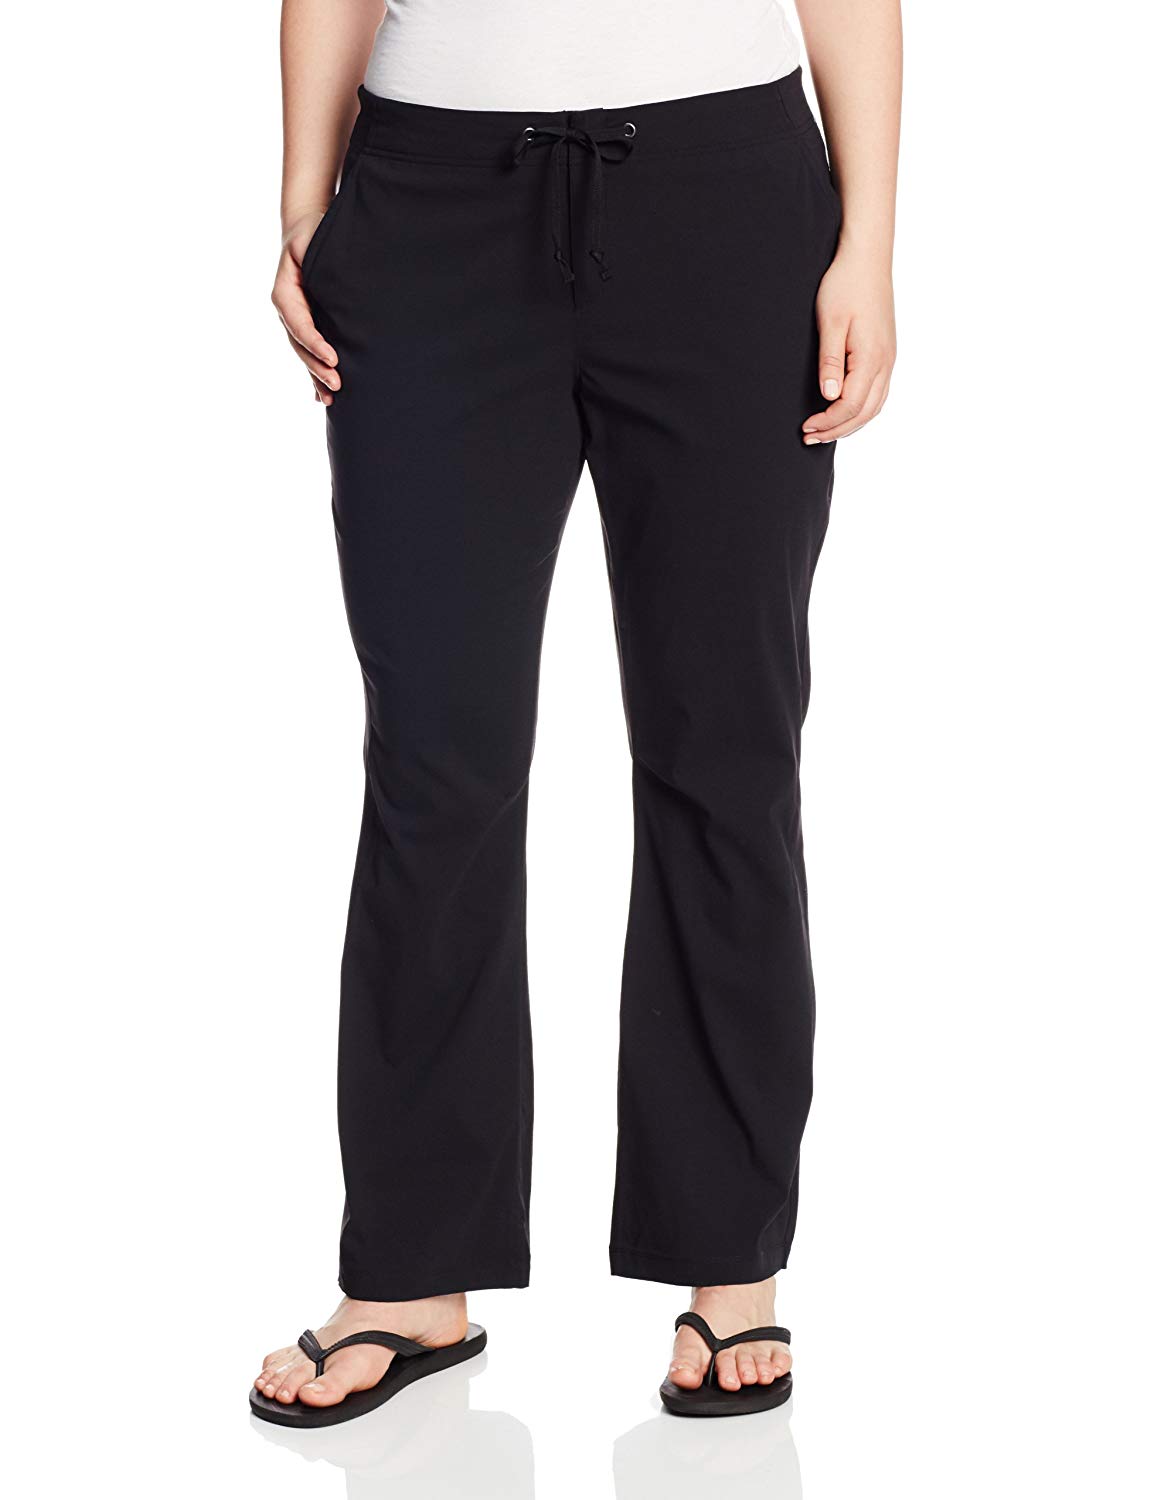 Columbia Women's Anytime Outdoor Plus Size Boot Cut Pant,, Black, Size ...